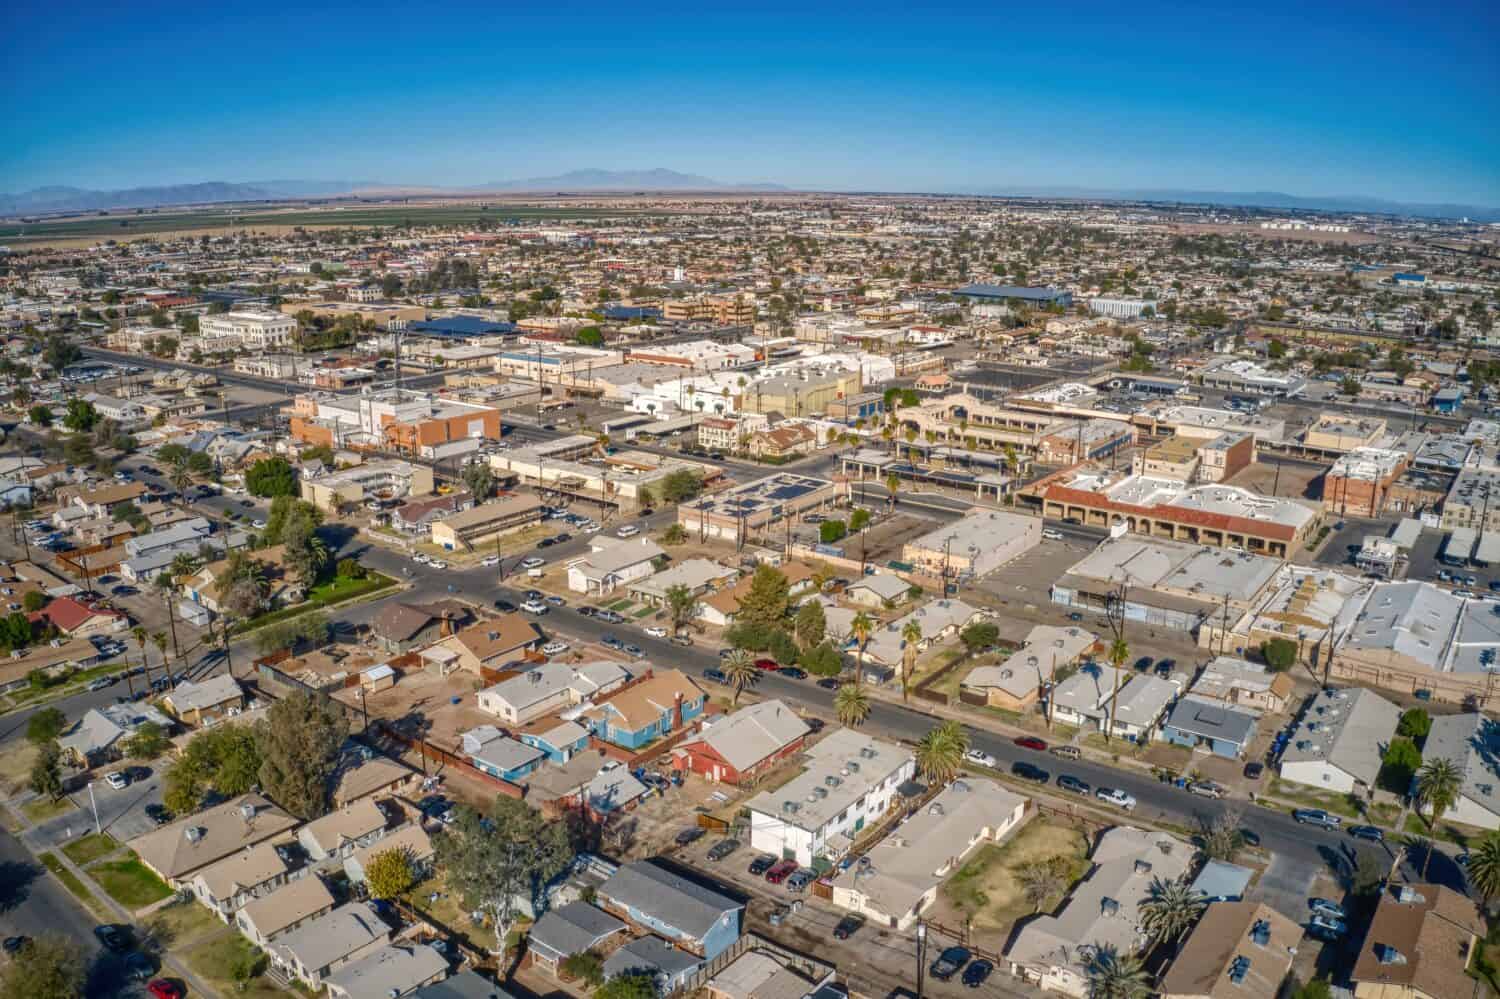 Aerial View of Downtown El Centro, California in the Imperial Valley by Jacob Boomsma